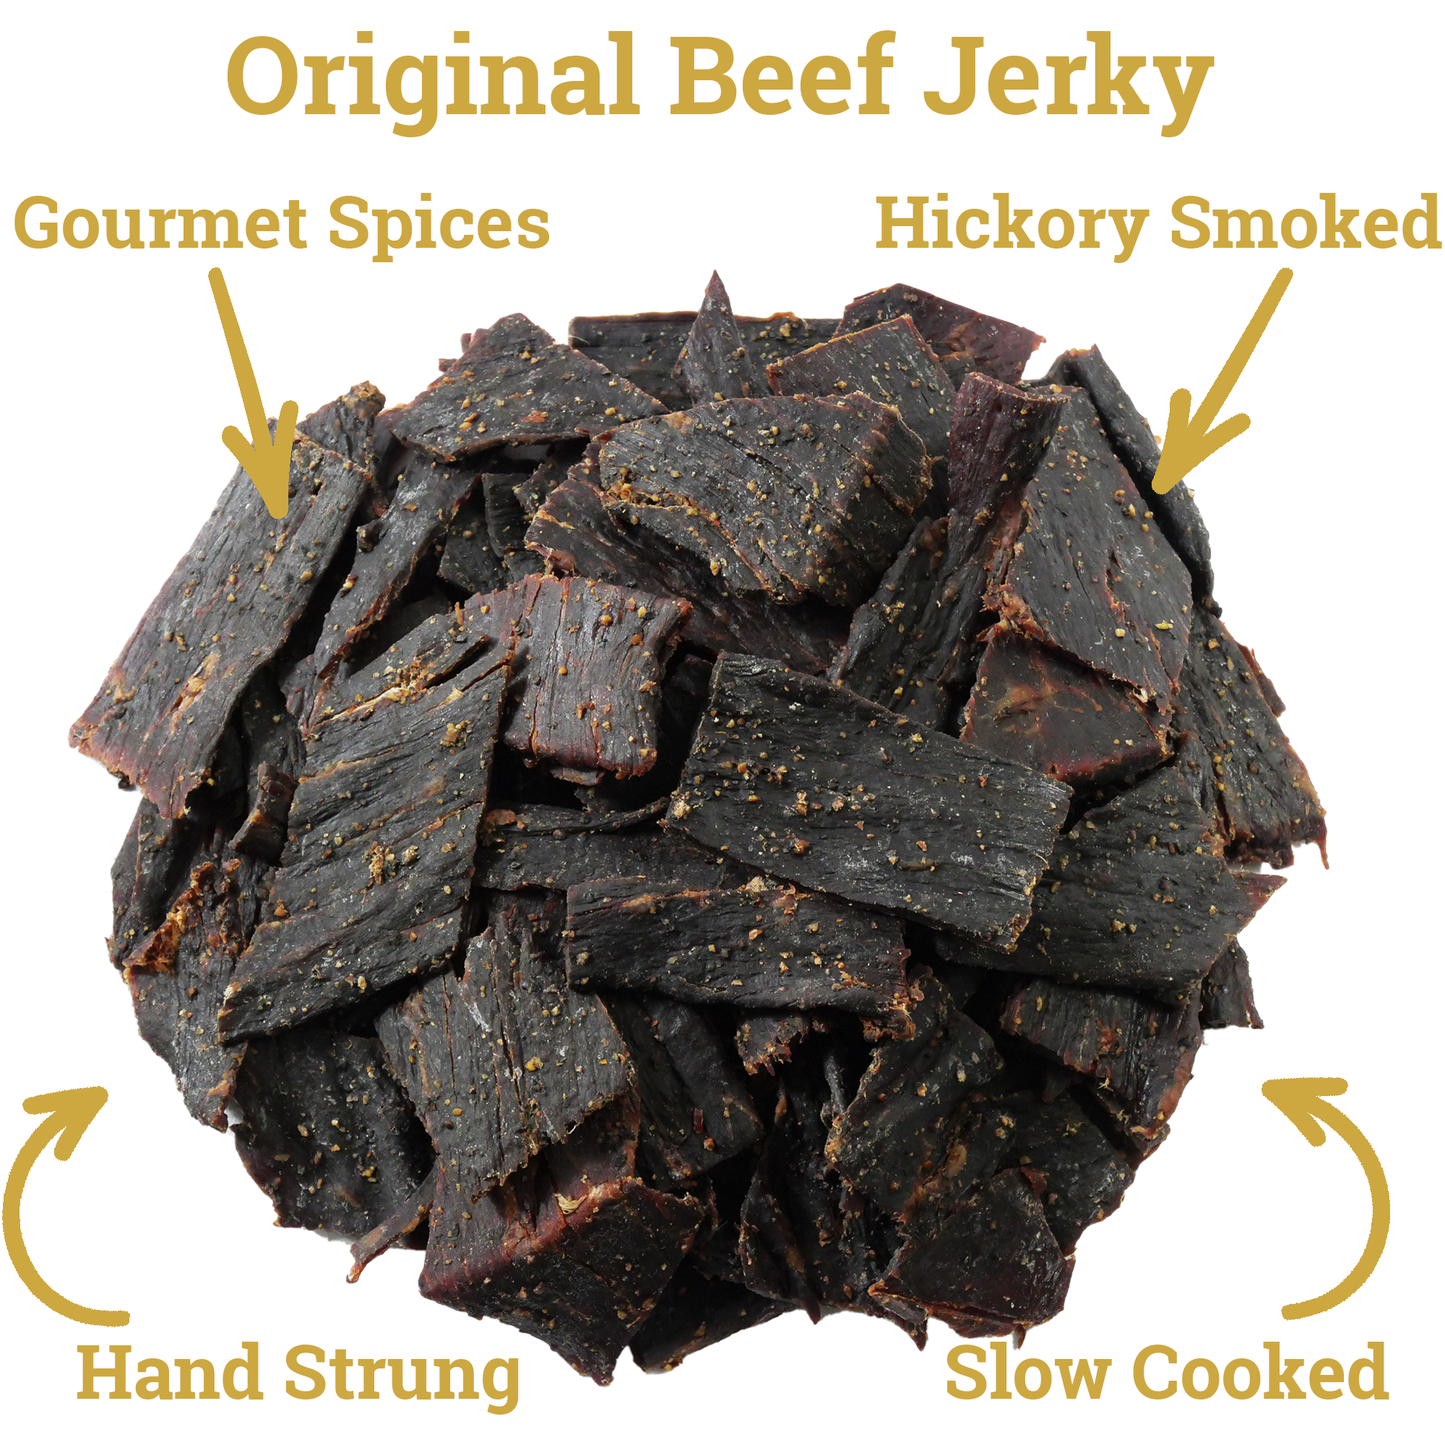 Lone Star Original Beef Jerky - Half Pound Resealable Bag - Classic Handcrafted Flavor - Made in The USA